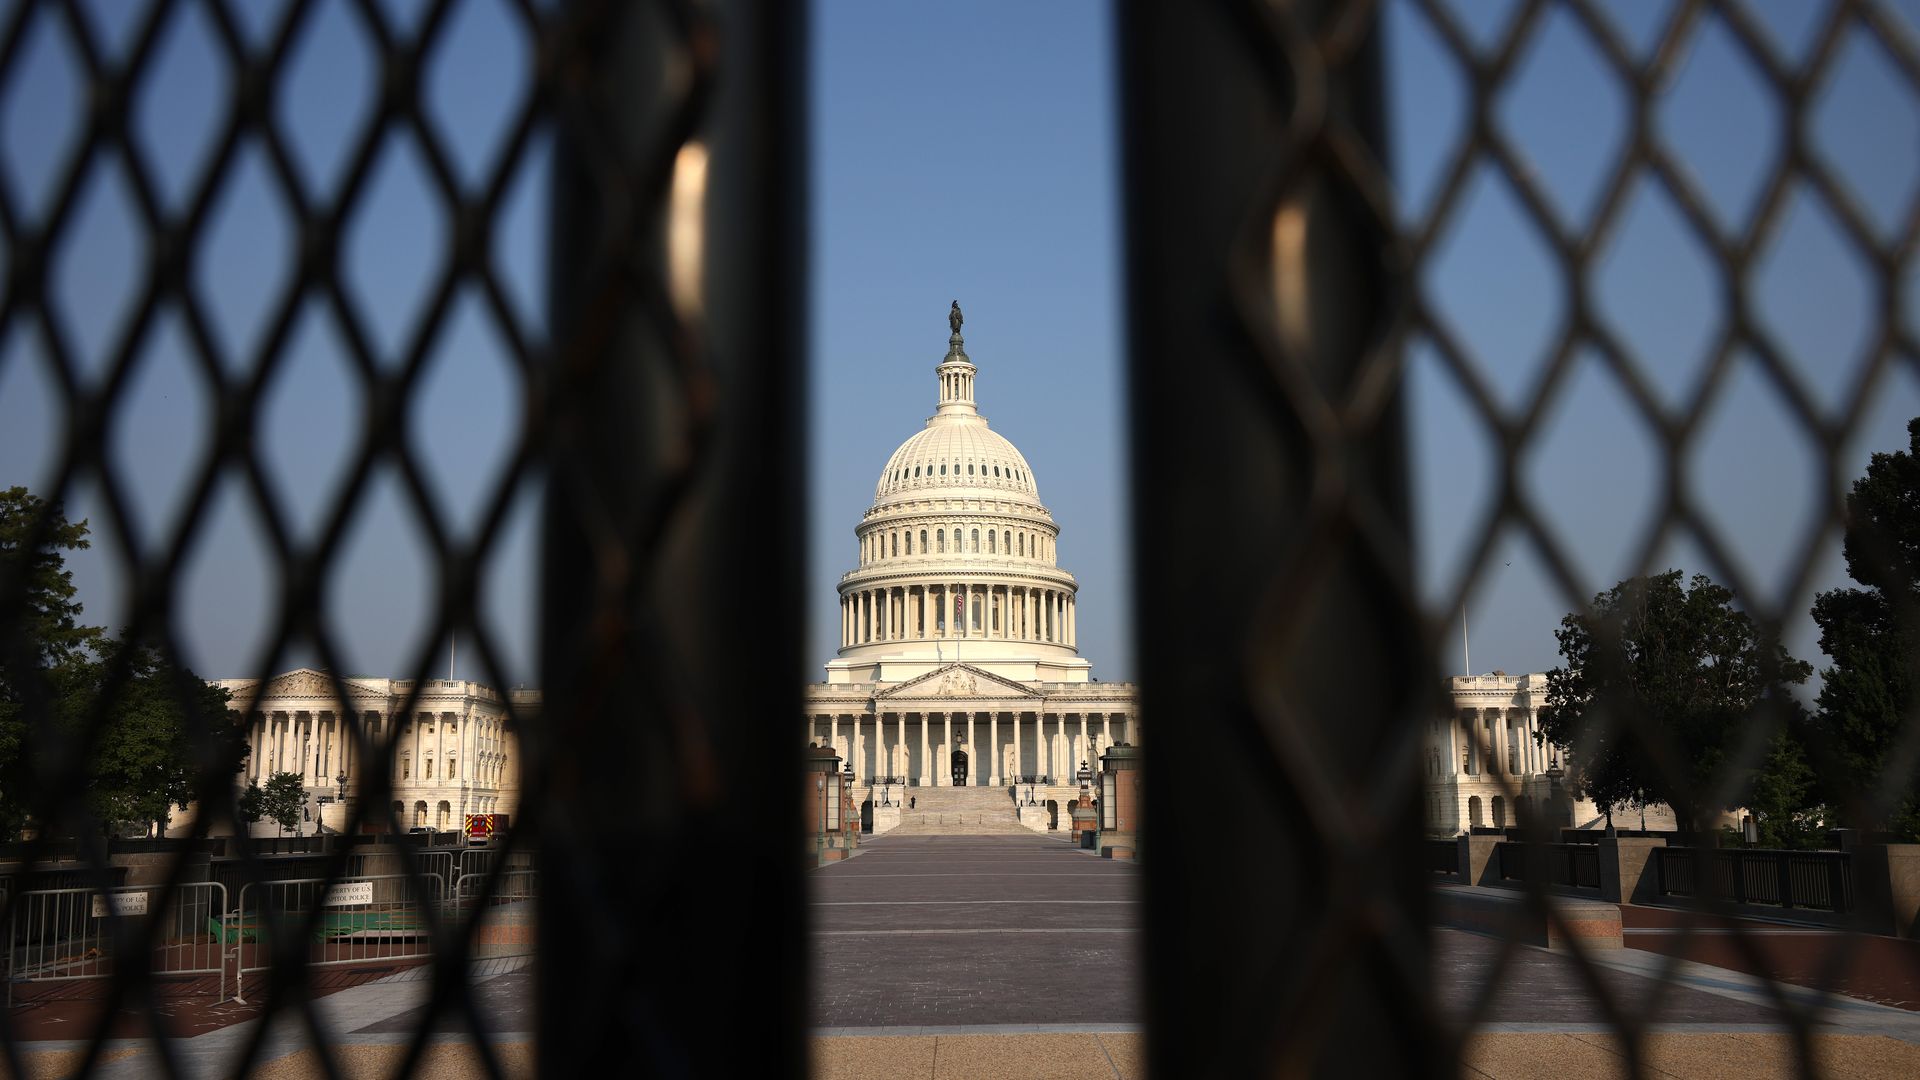 Picture of the Capitol building taken in between fences